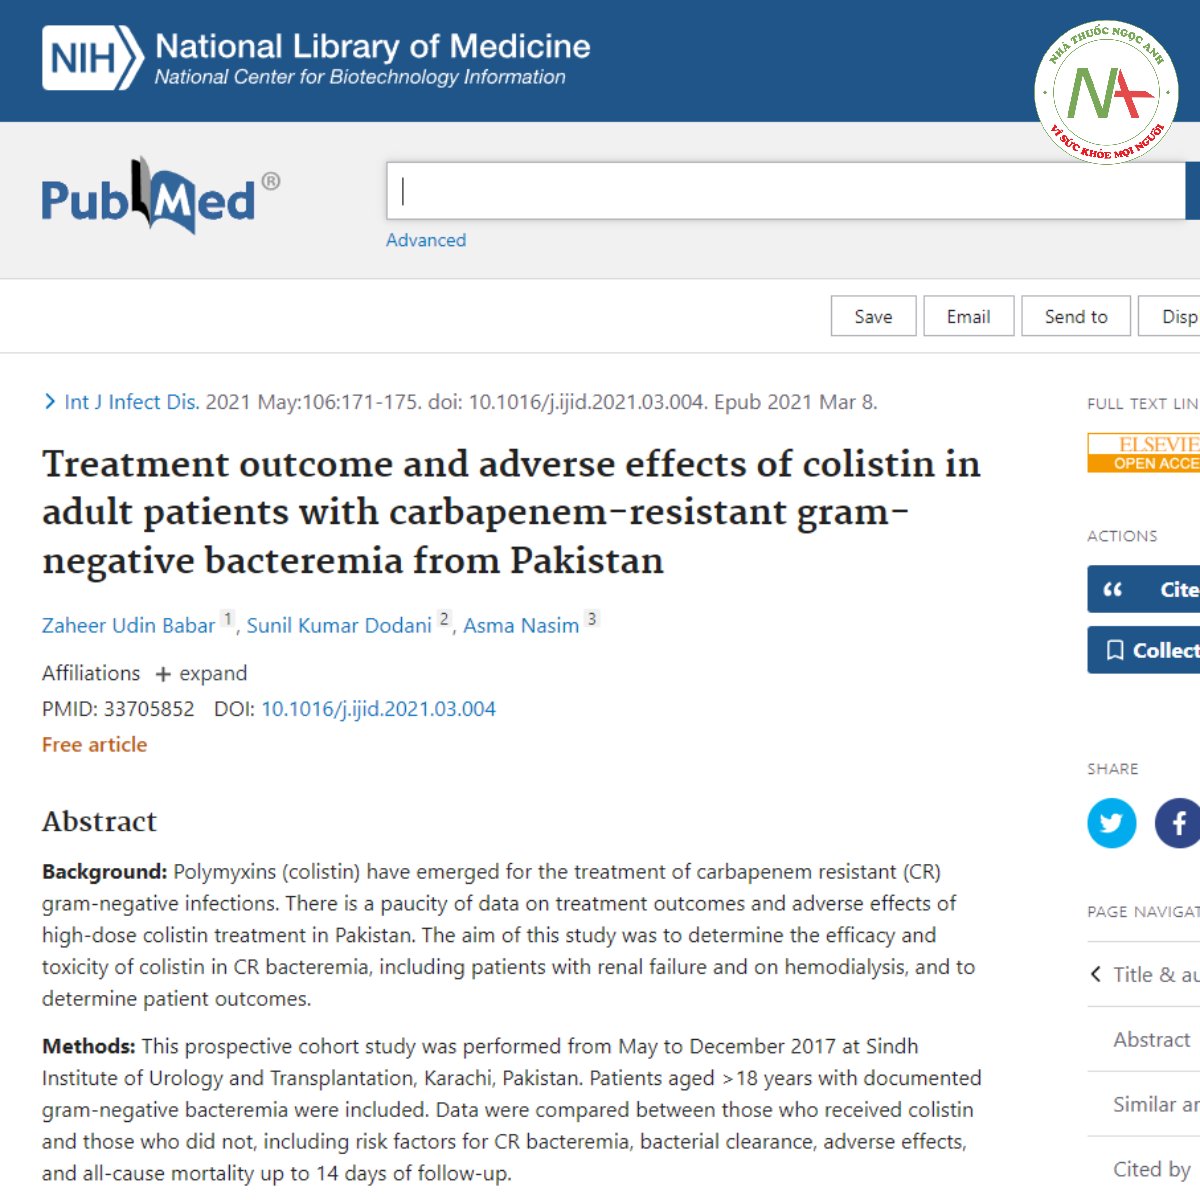 Treatment outcome and adverse effects of colistin in adult patients with carbapenem-resistant gram-negative bacteremia from Pakistan